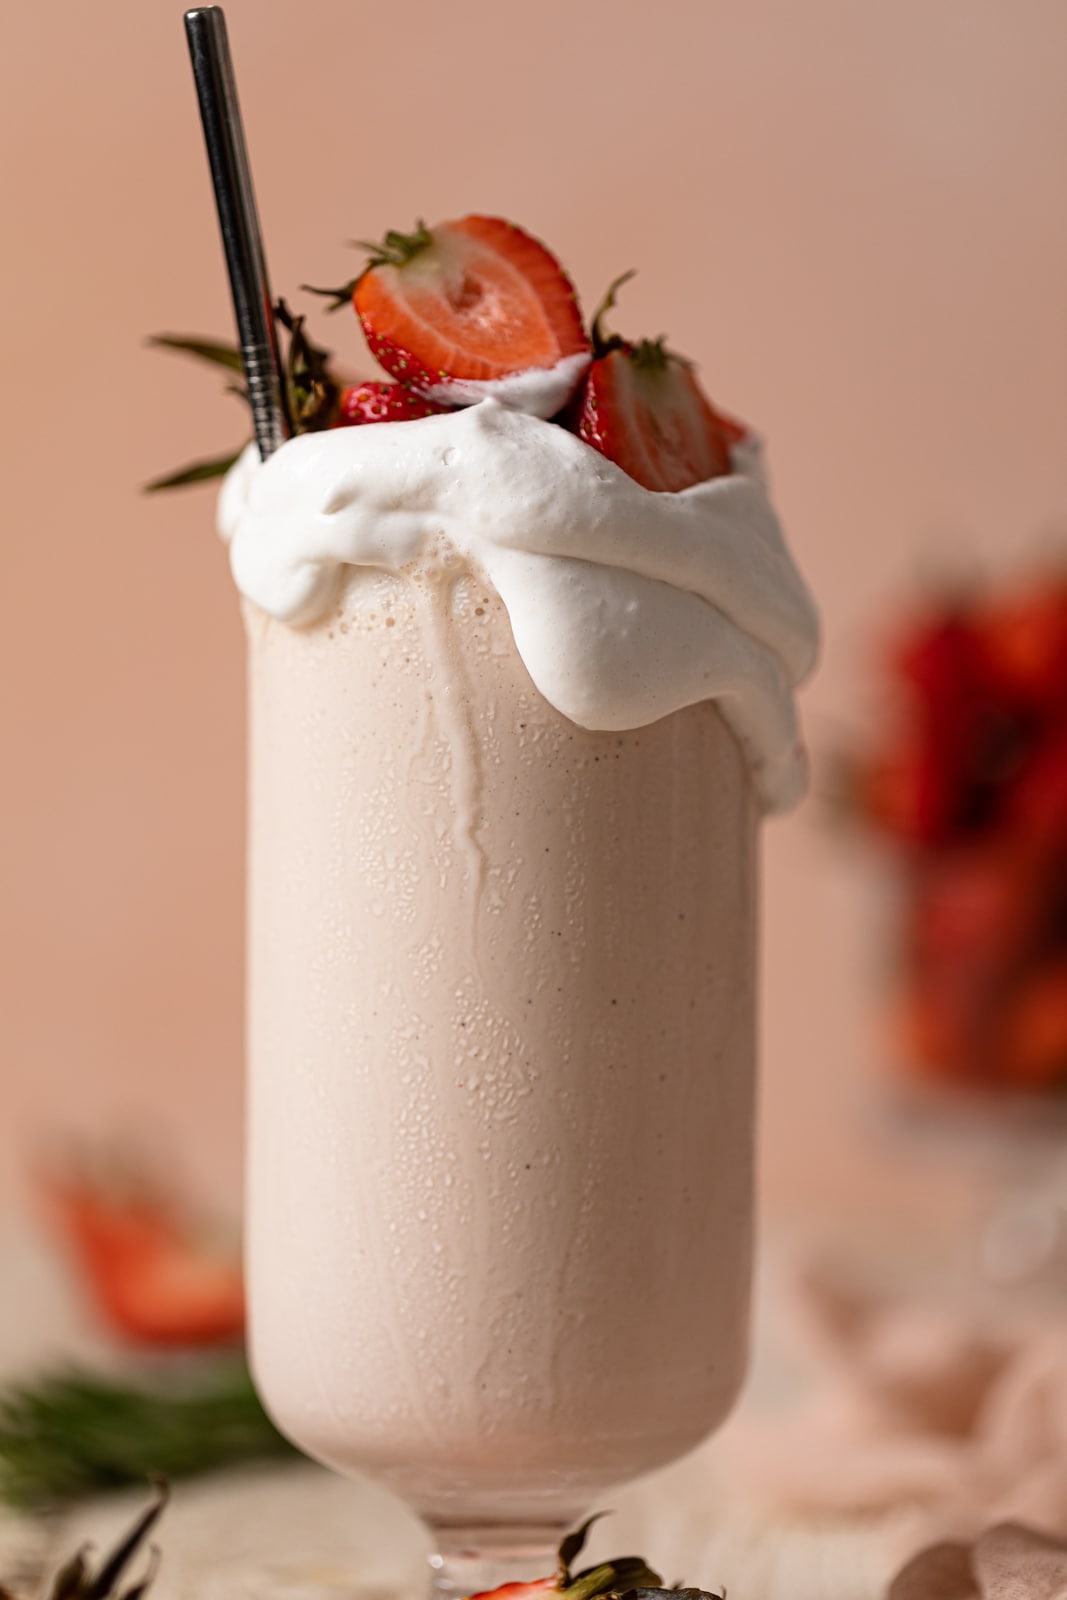 Closeup of a glass overflowing with Dairy-Free Strawberry Milkshake